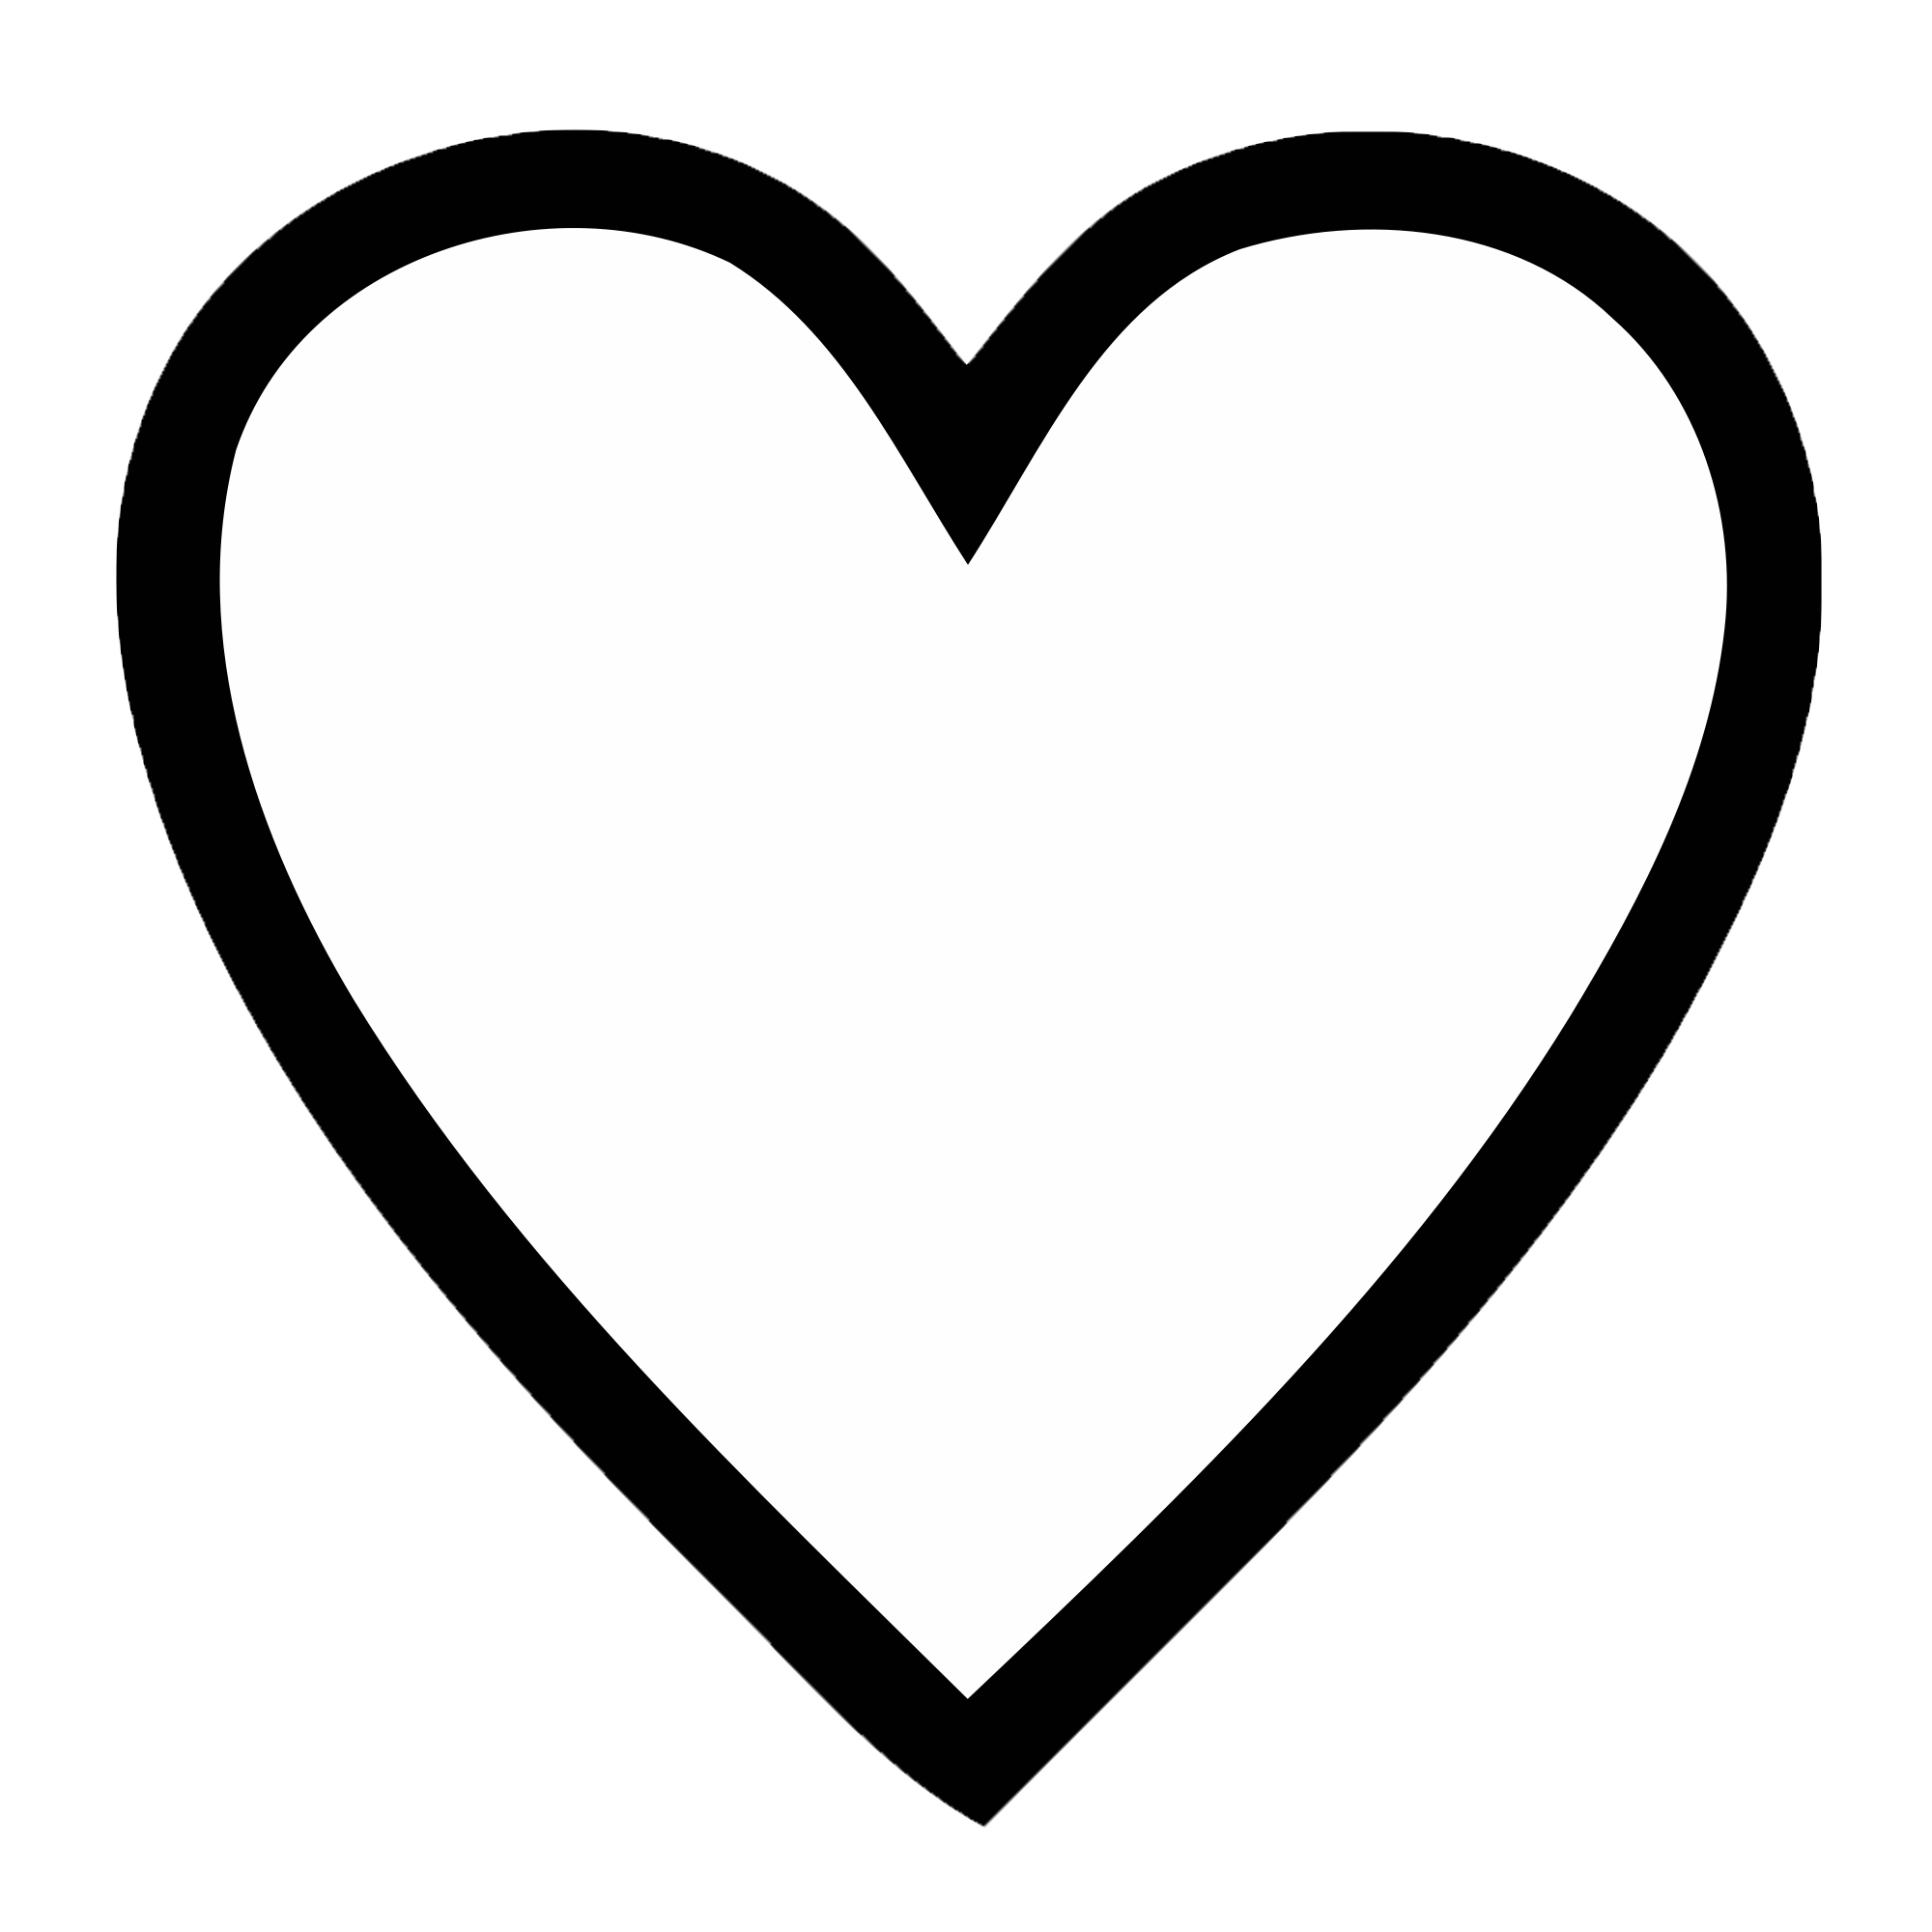 File:Heart-SG2001-transparent.png - Wikimedia Commons